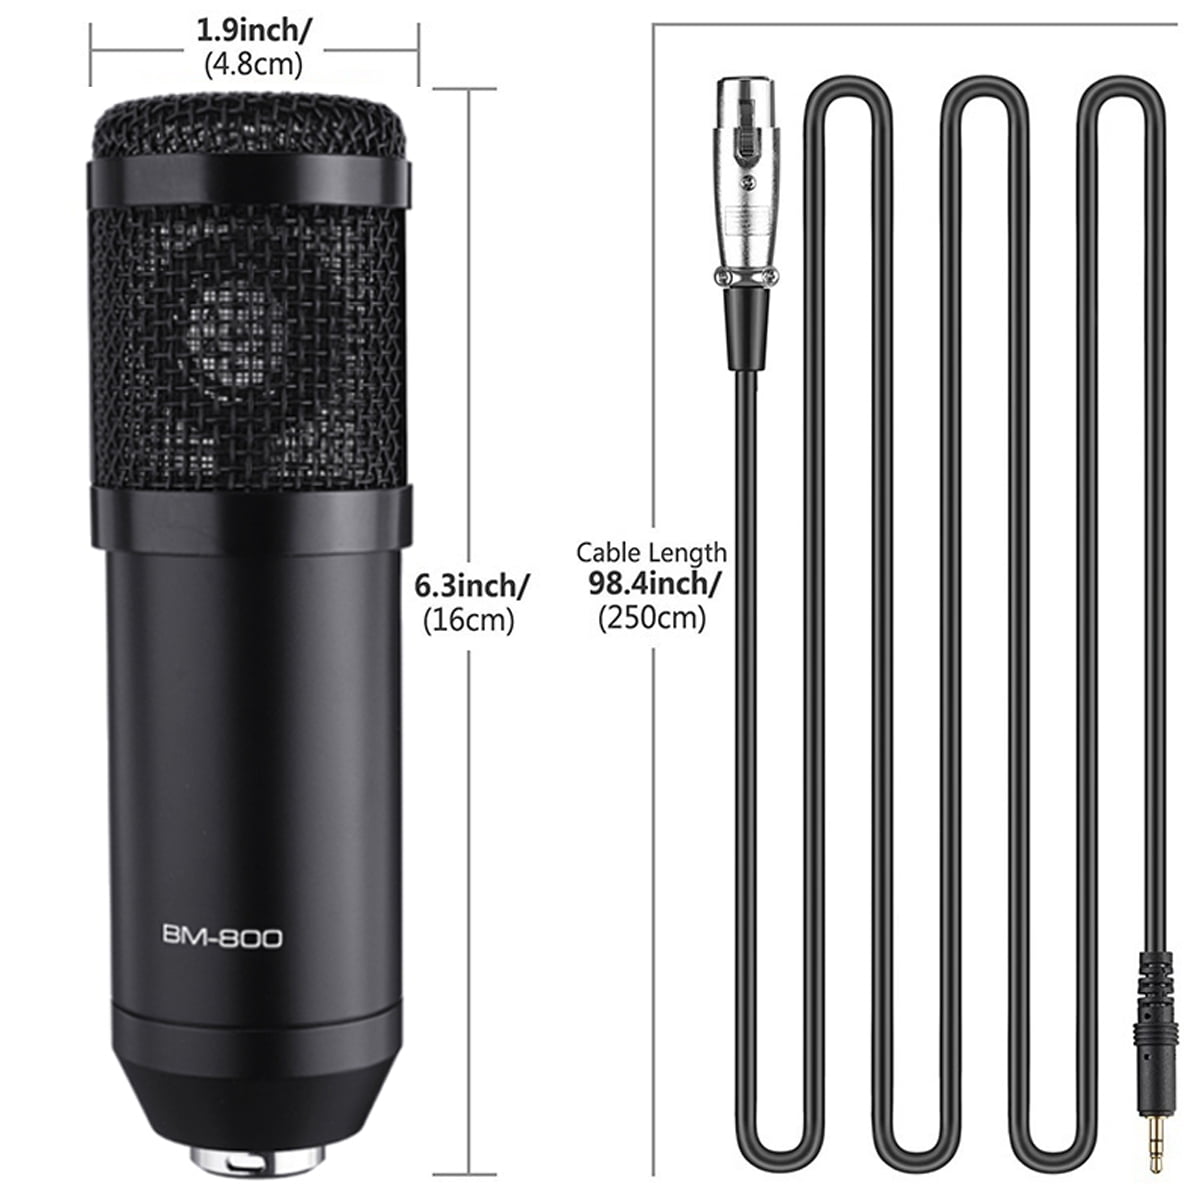 UBUISOTKZ Podcast Equipment Bundle, BM-800 Mic Kit and V8Ⅱ Live Sound Card  with Audio Mixer, Mic for Gaming, Live Streaming, Podcasting, Music